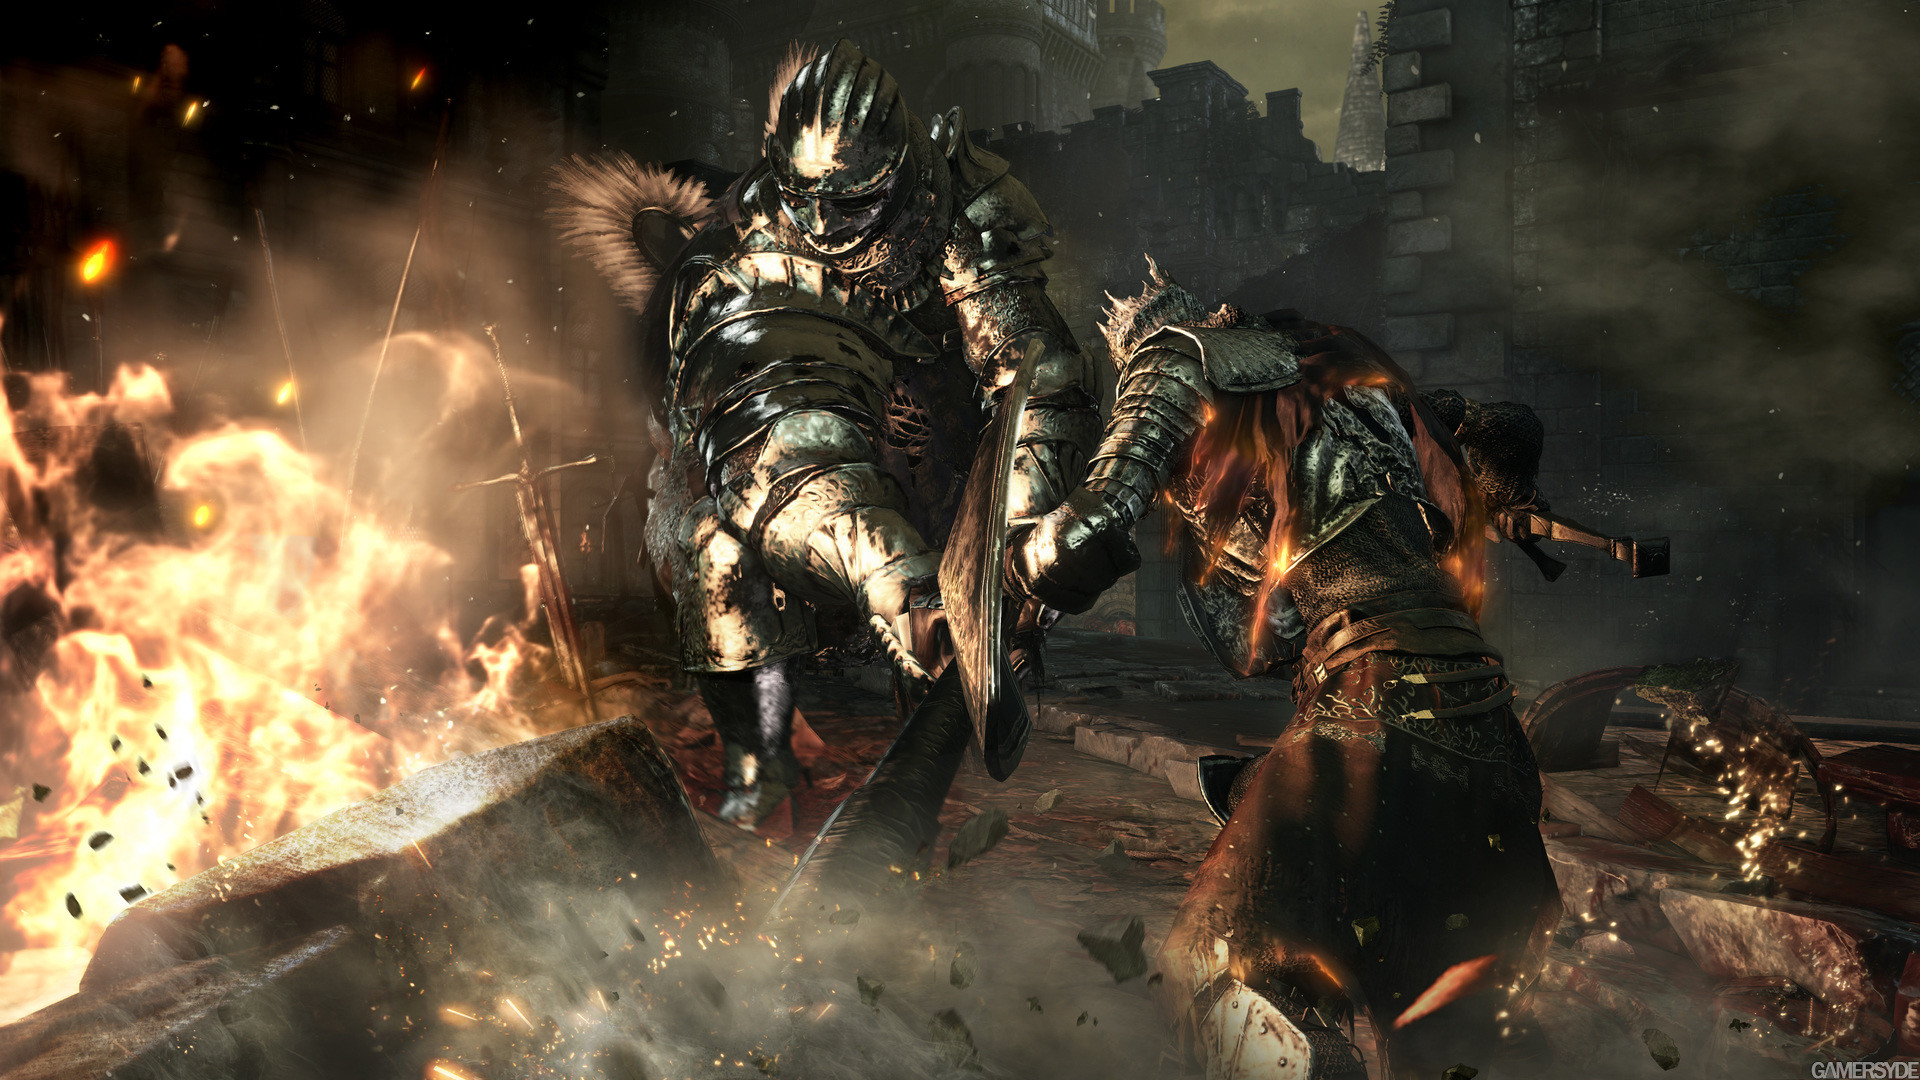 dark souls animated wallpaper,action adventure game,pc game,demon,strategy video game,cg artwork